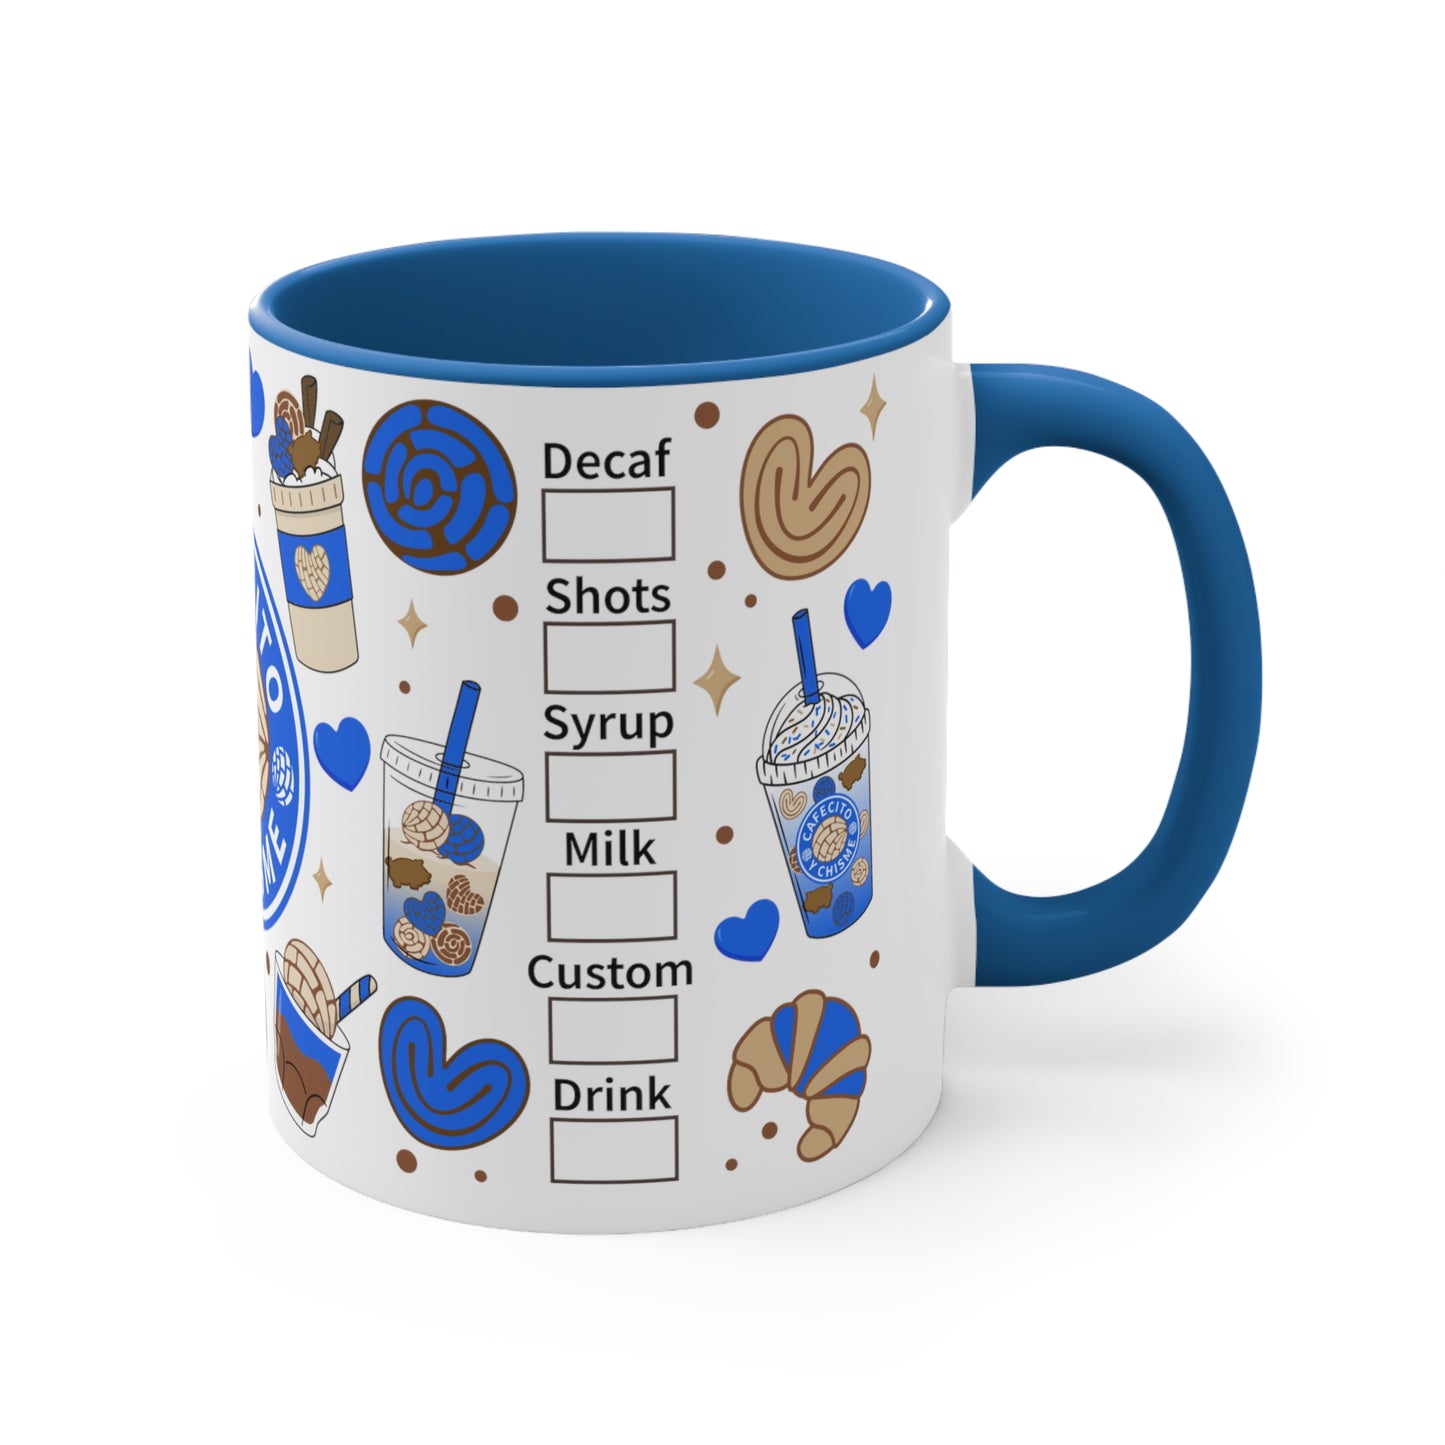 Blue cafecito y chisme Coffee Mug, 11oz for coffee time and chisme time. Senora life gift for holiday season. Mexican cup